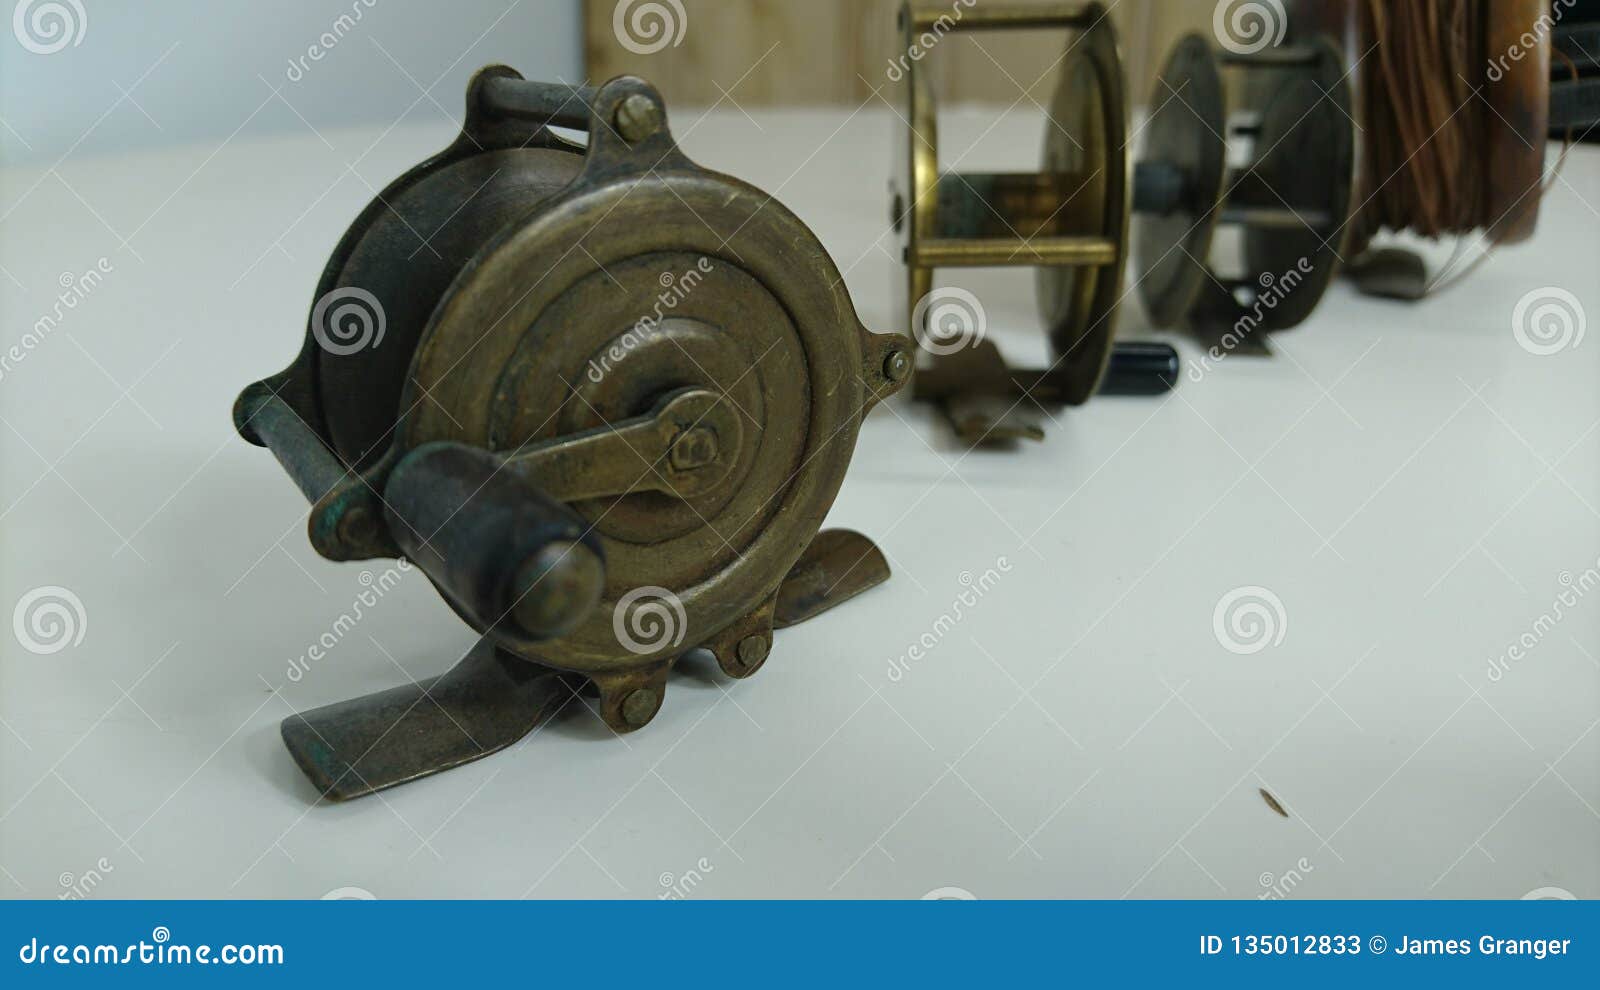 https://thumbs.dreamstime.com/z/some-antique-brass-fishing-reels-collection-vintage-tackle-reals-fly-coarse-sport-hobby-sitting-standing-table-135012833.jpg